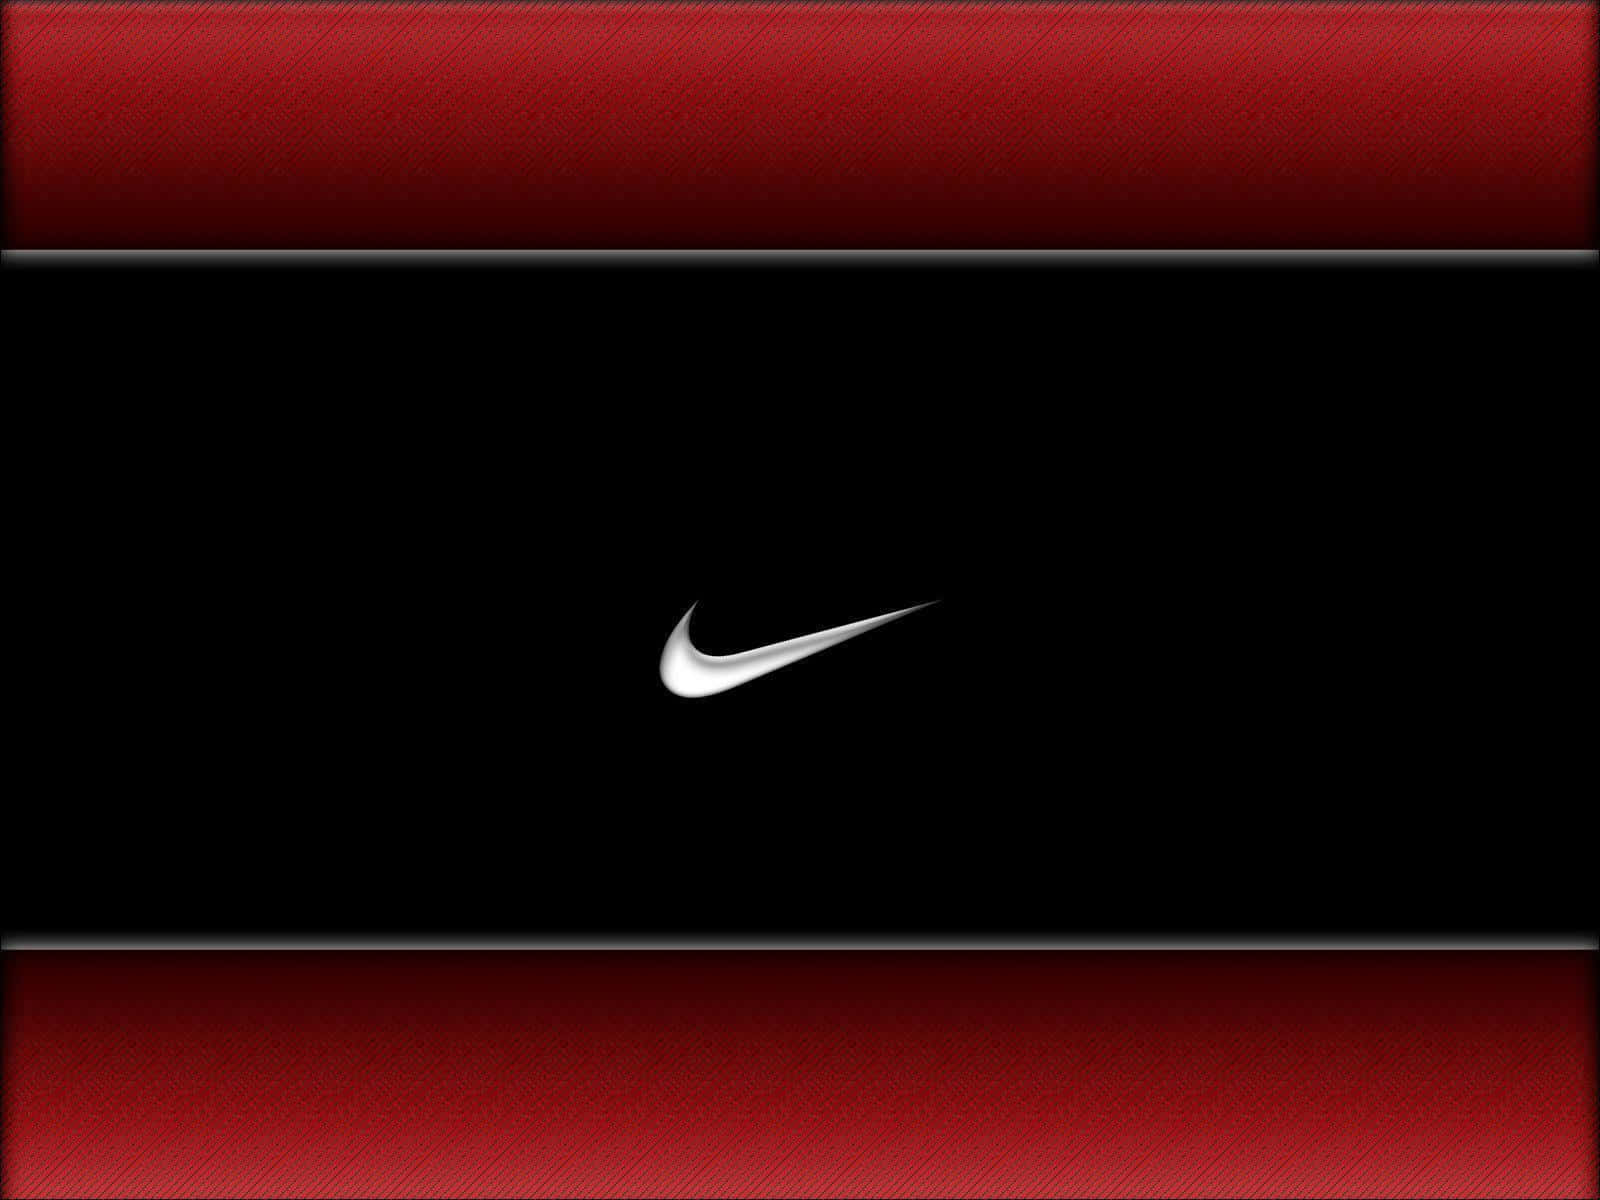 Get stylish in Red Nike Wallpaper